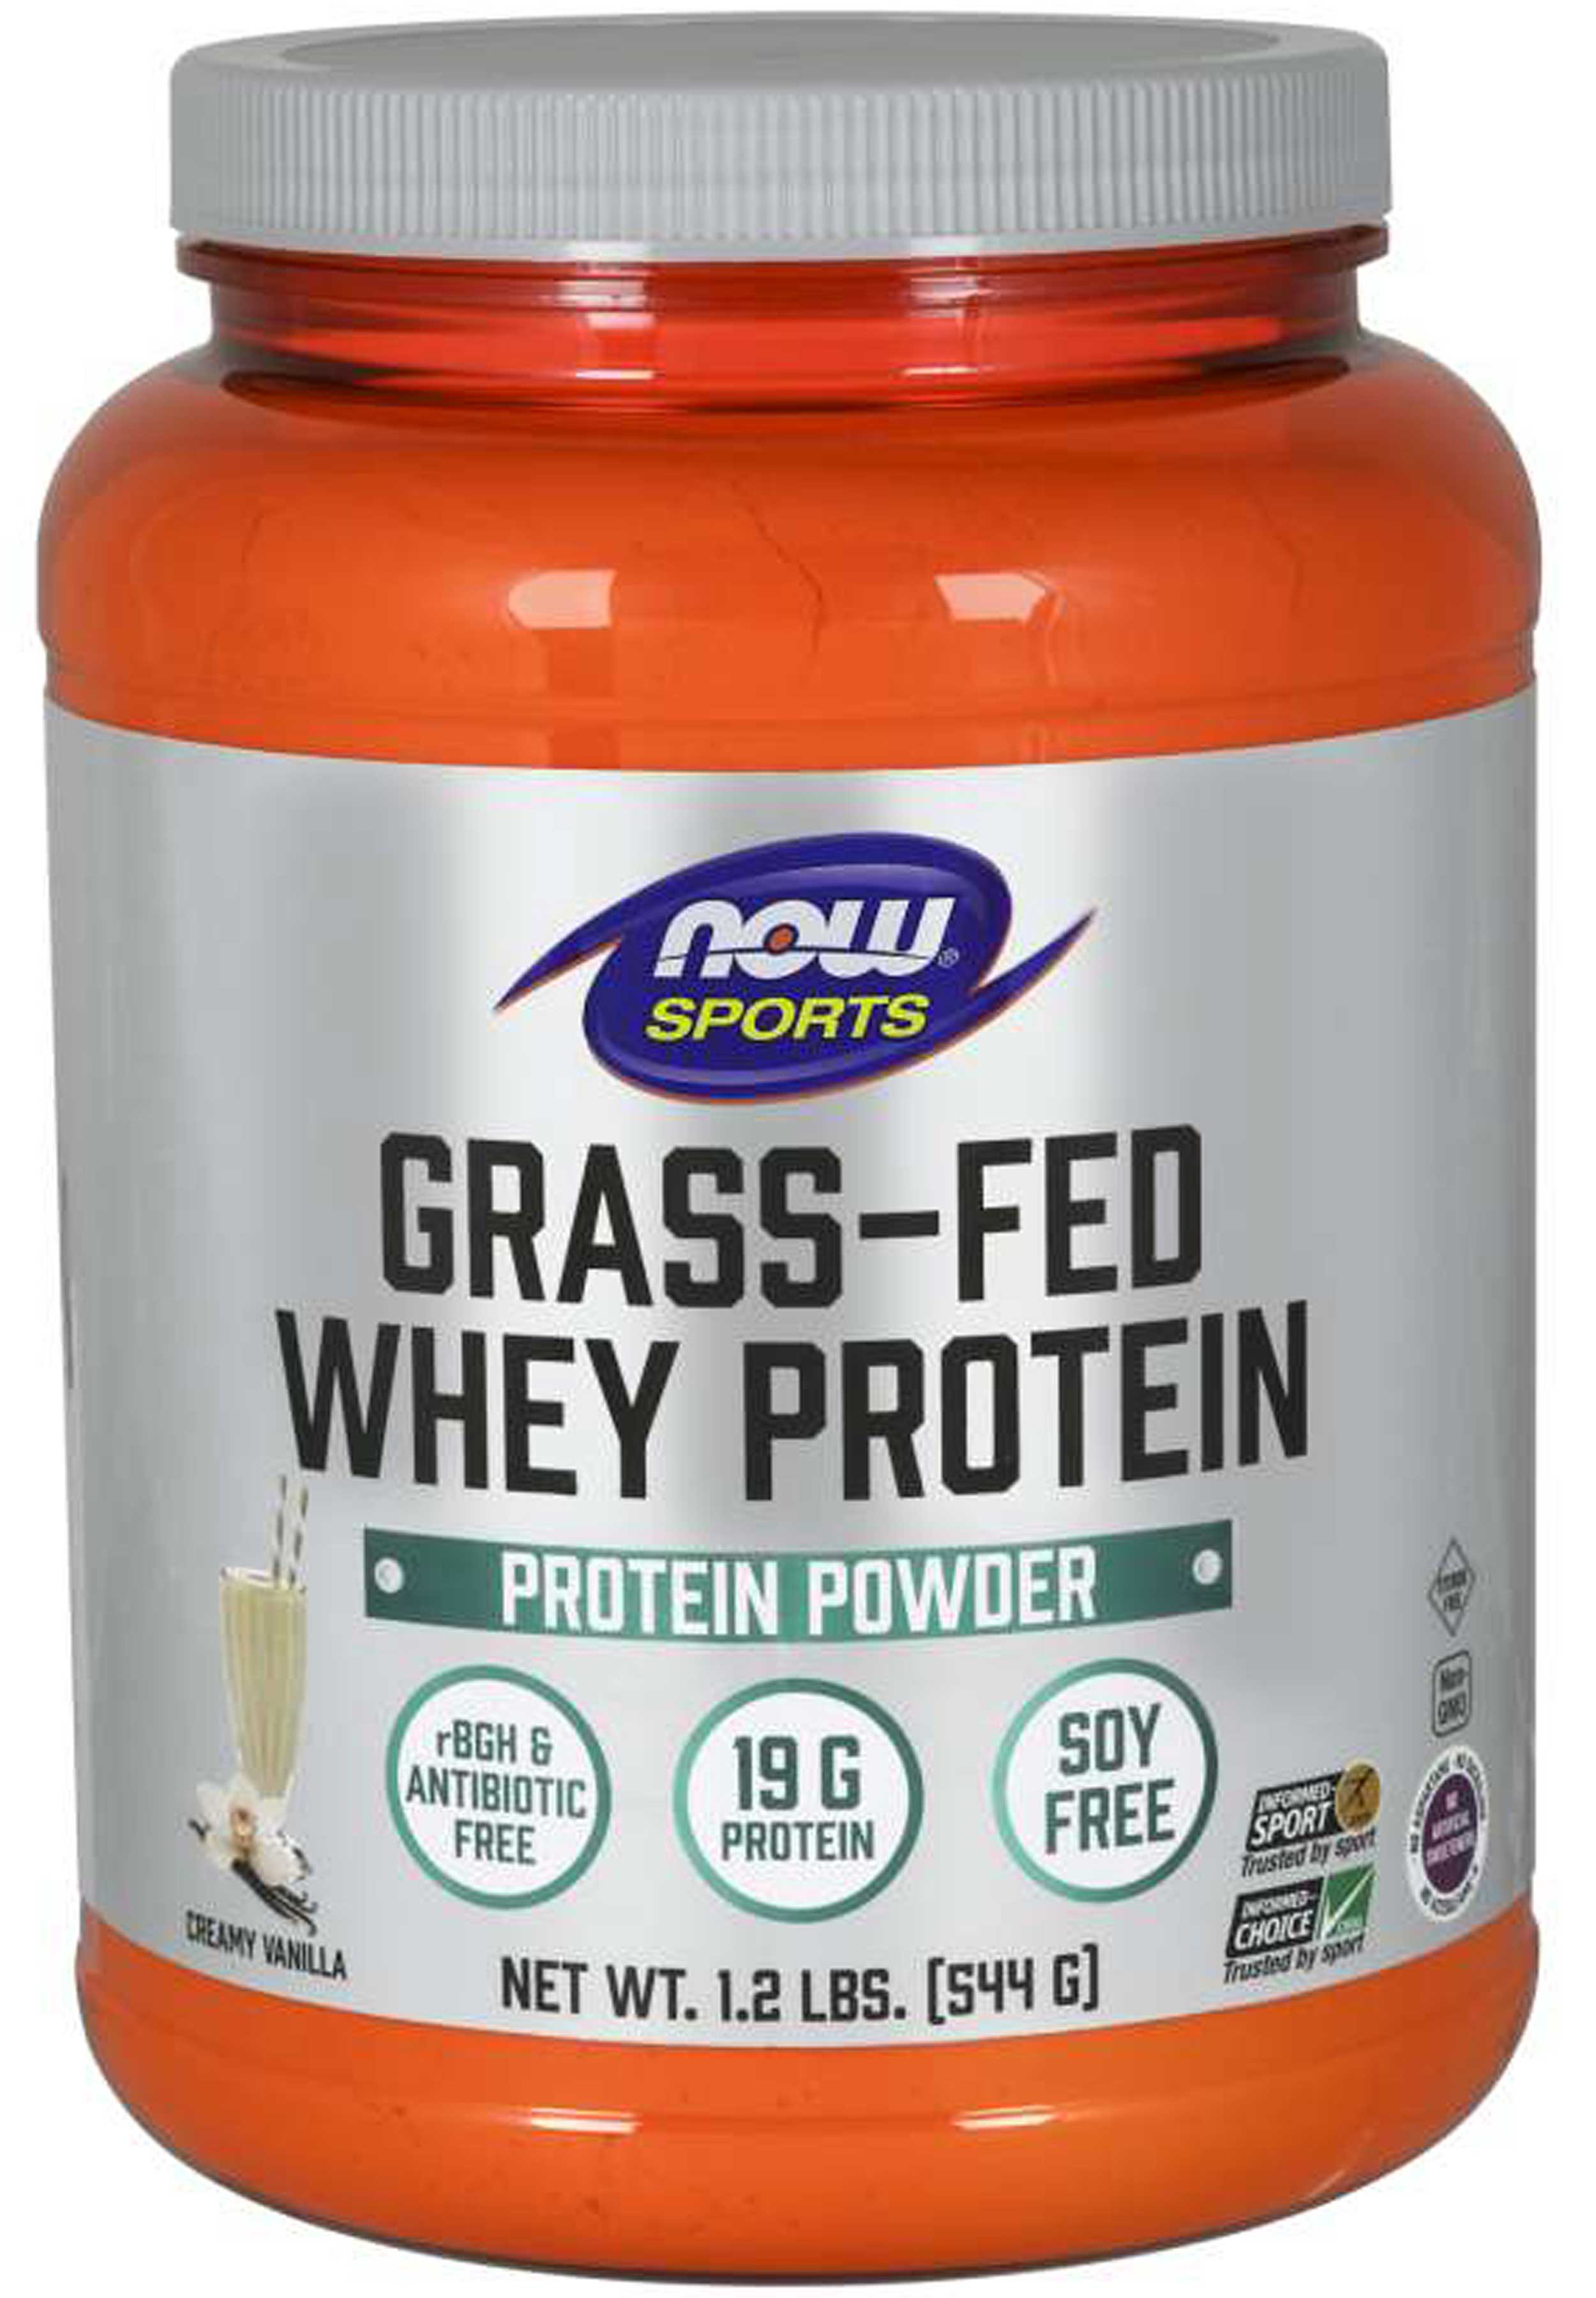 NOW Sports Grass-Fed Whey Protein